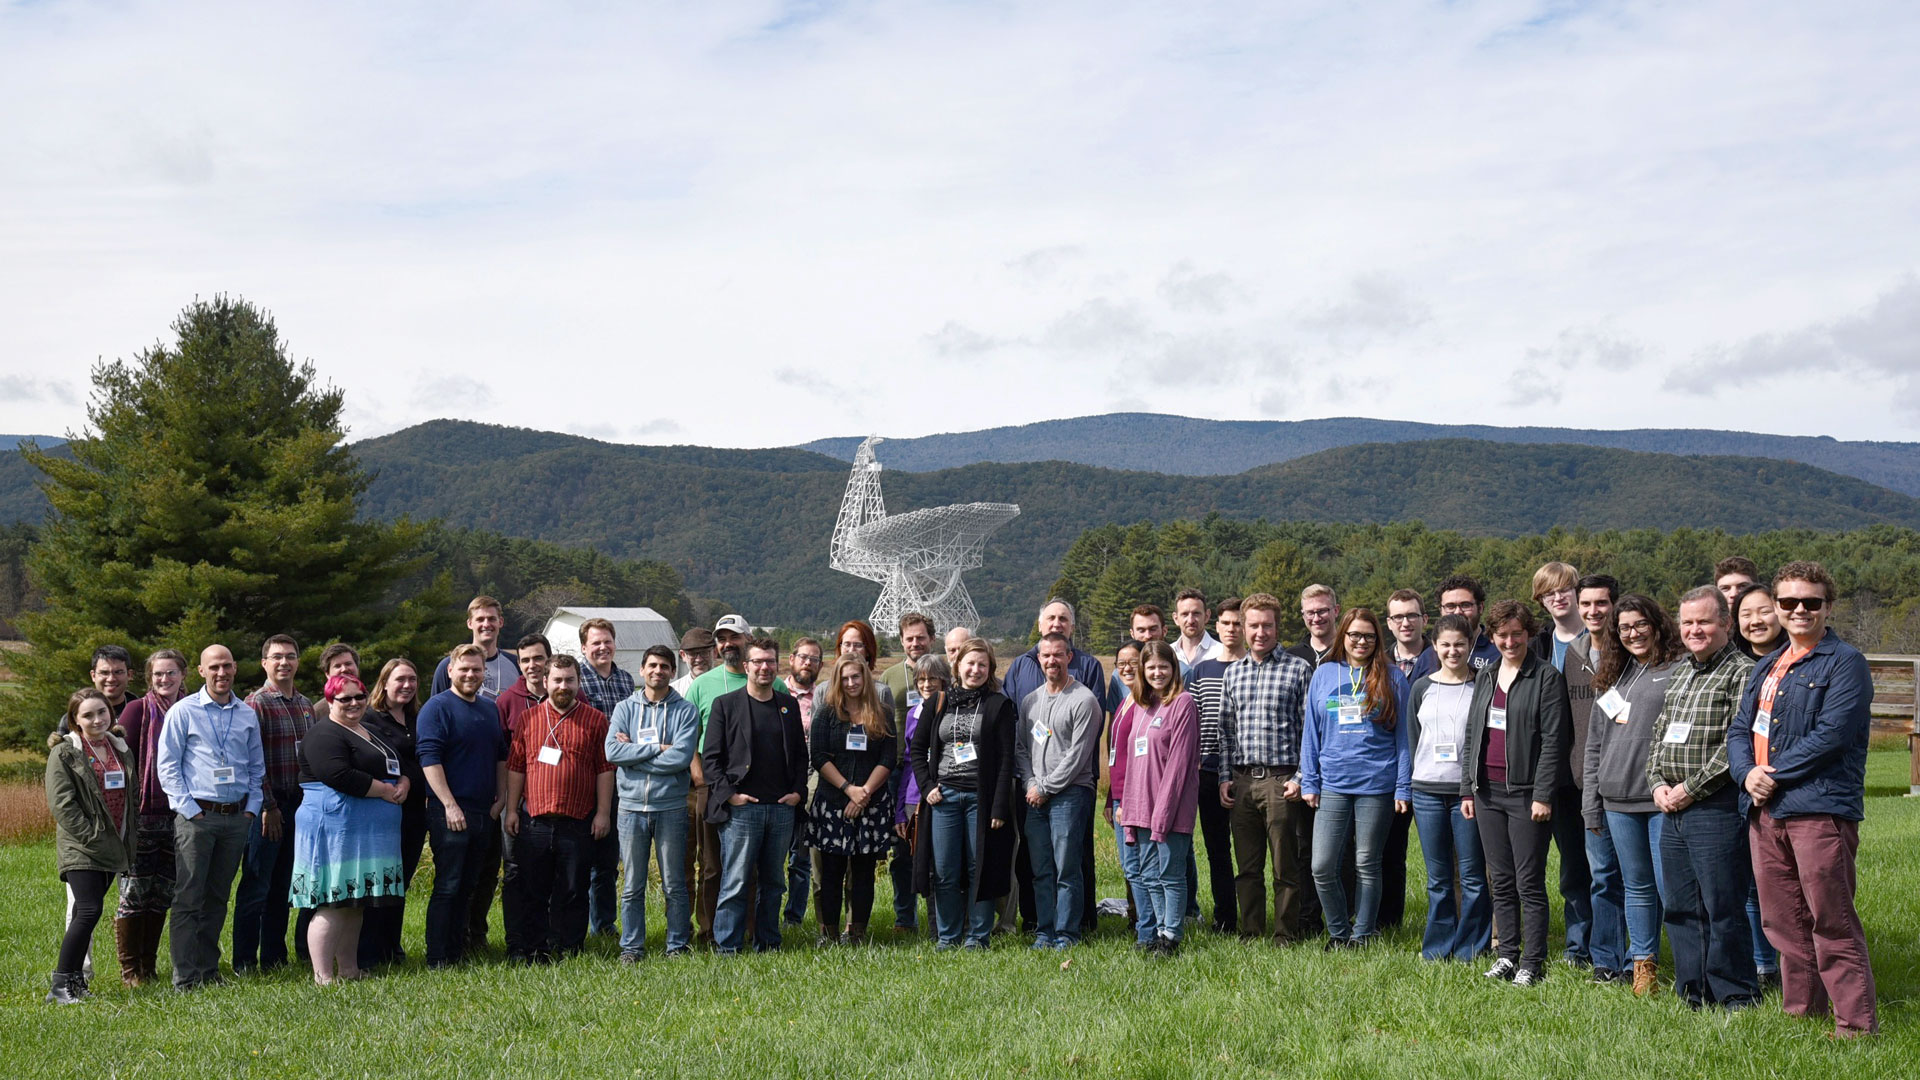 Photo of NANOGrav Collaboration members at a scientific conferenceheld at the Green Bank Observatory in West Virginia in 2018. Credit: Tonia Klein for the NANOGrav Collaboration